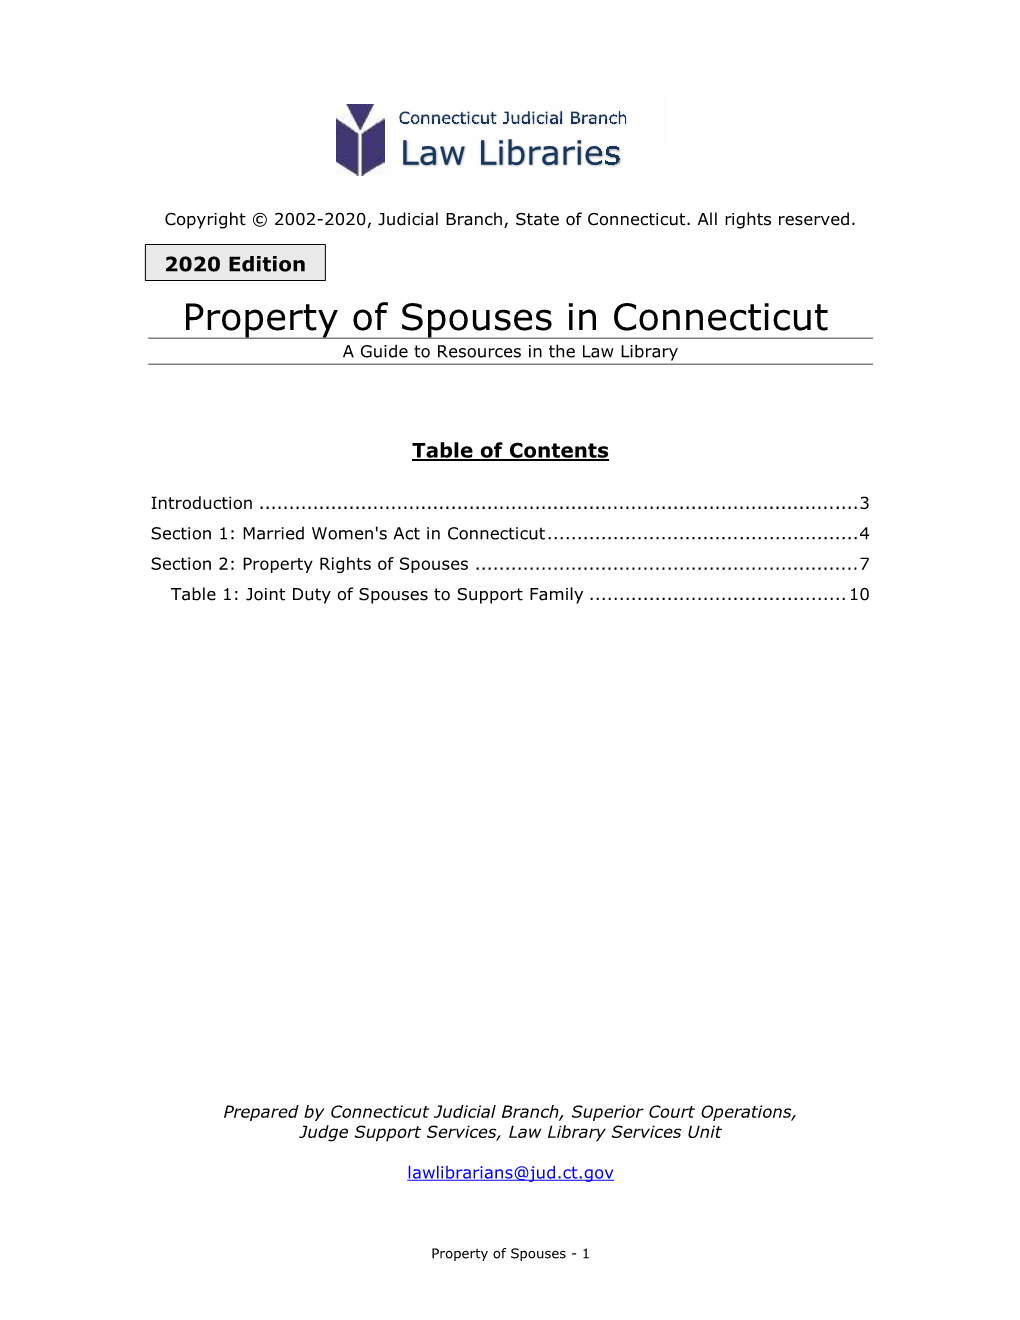 Property of Spouses in Connecticut a Guide to Resources in the Law Library